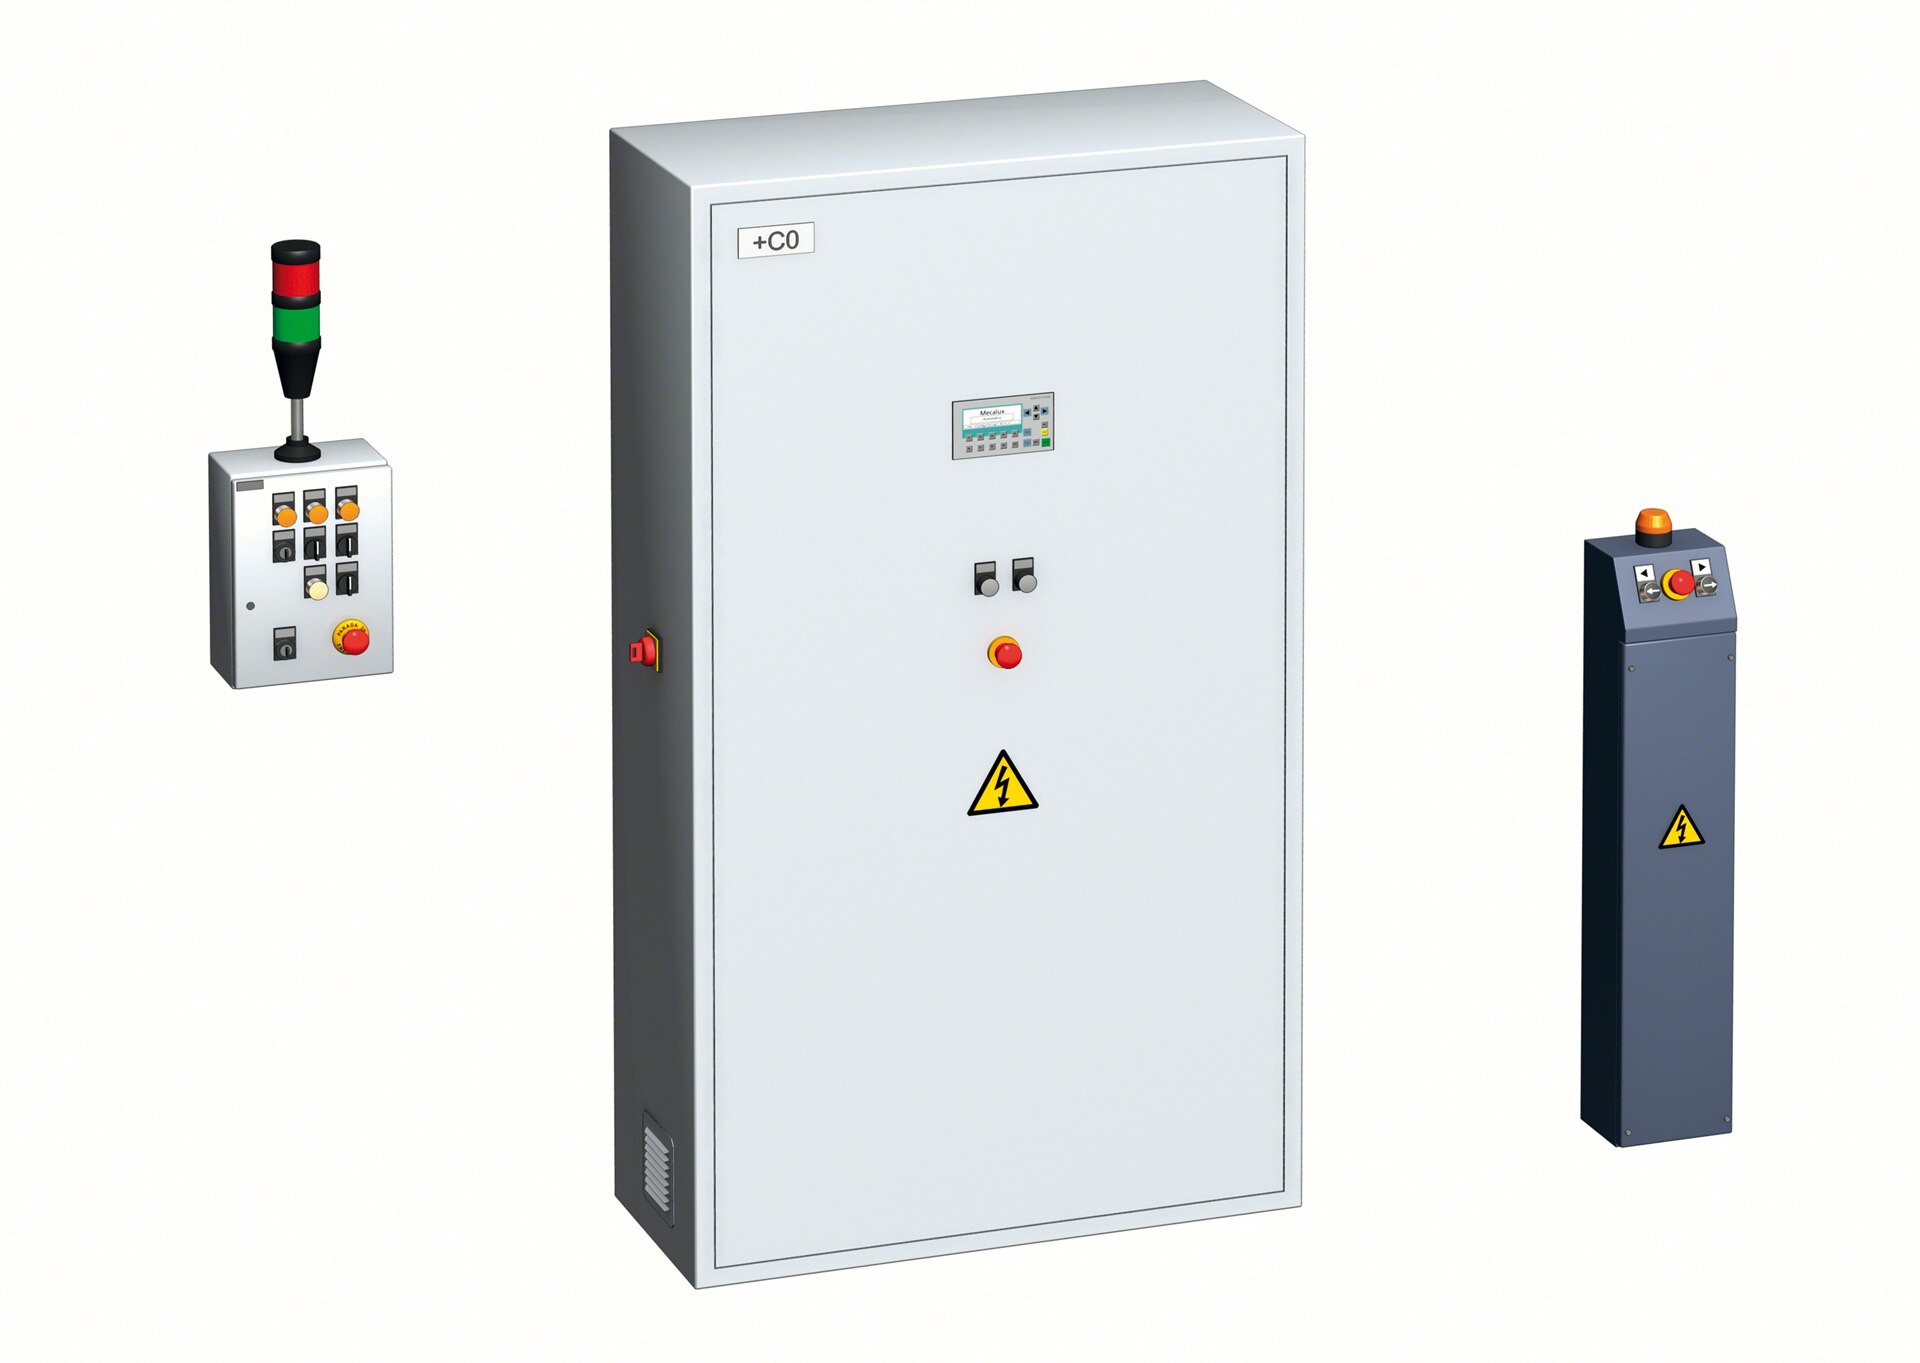 The Movirack control system includes three types of devices: the control panel, the main power panel and the on-board control panels